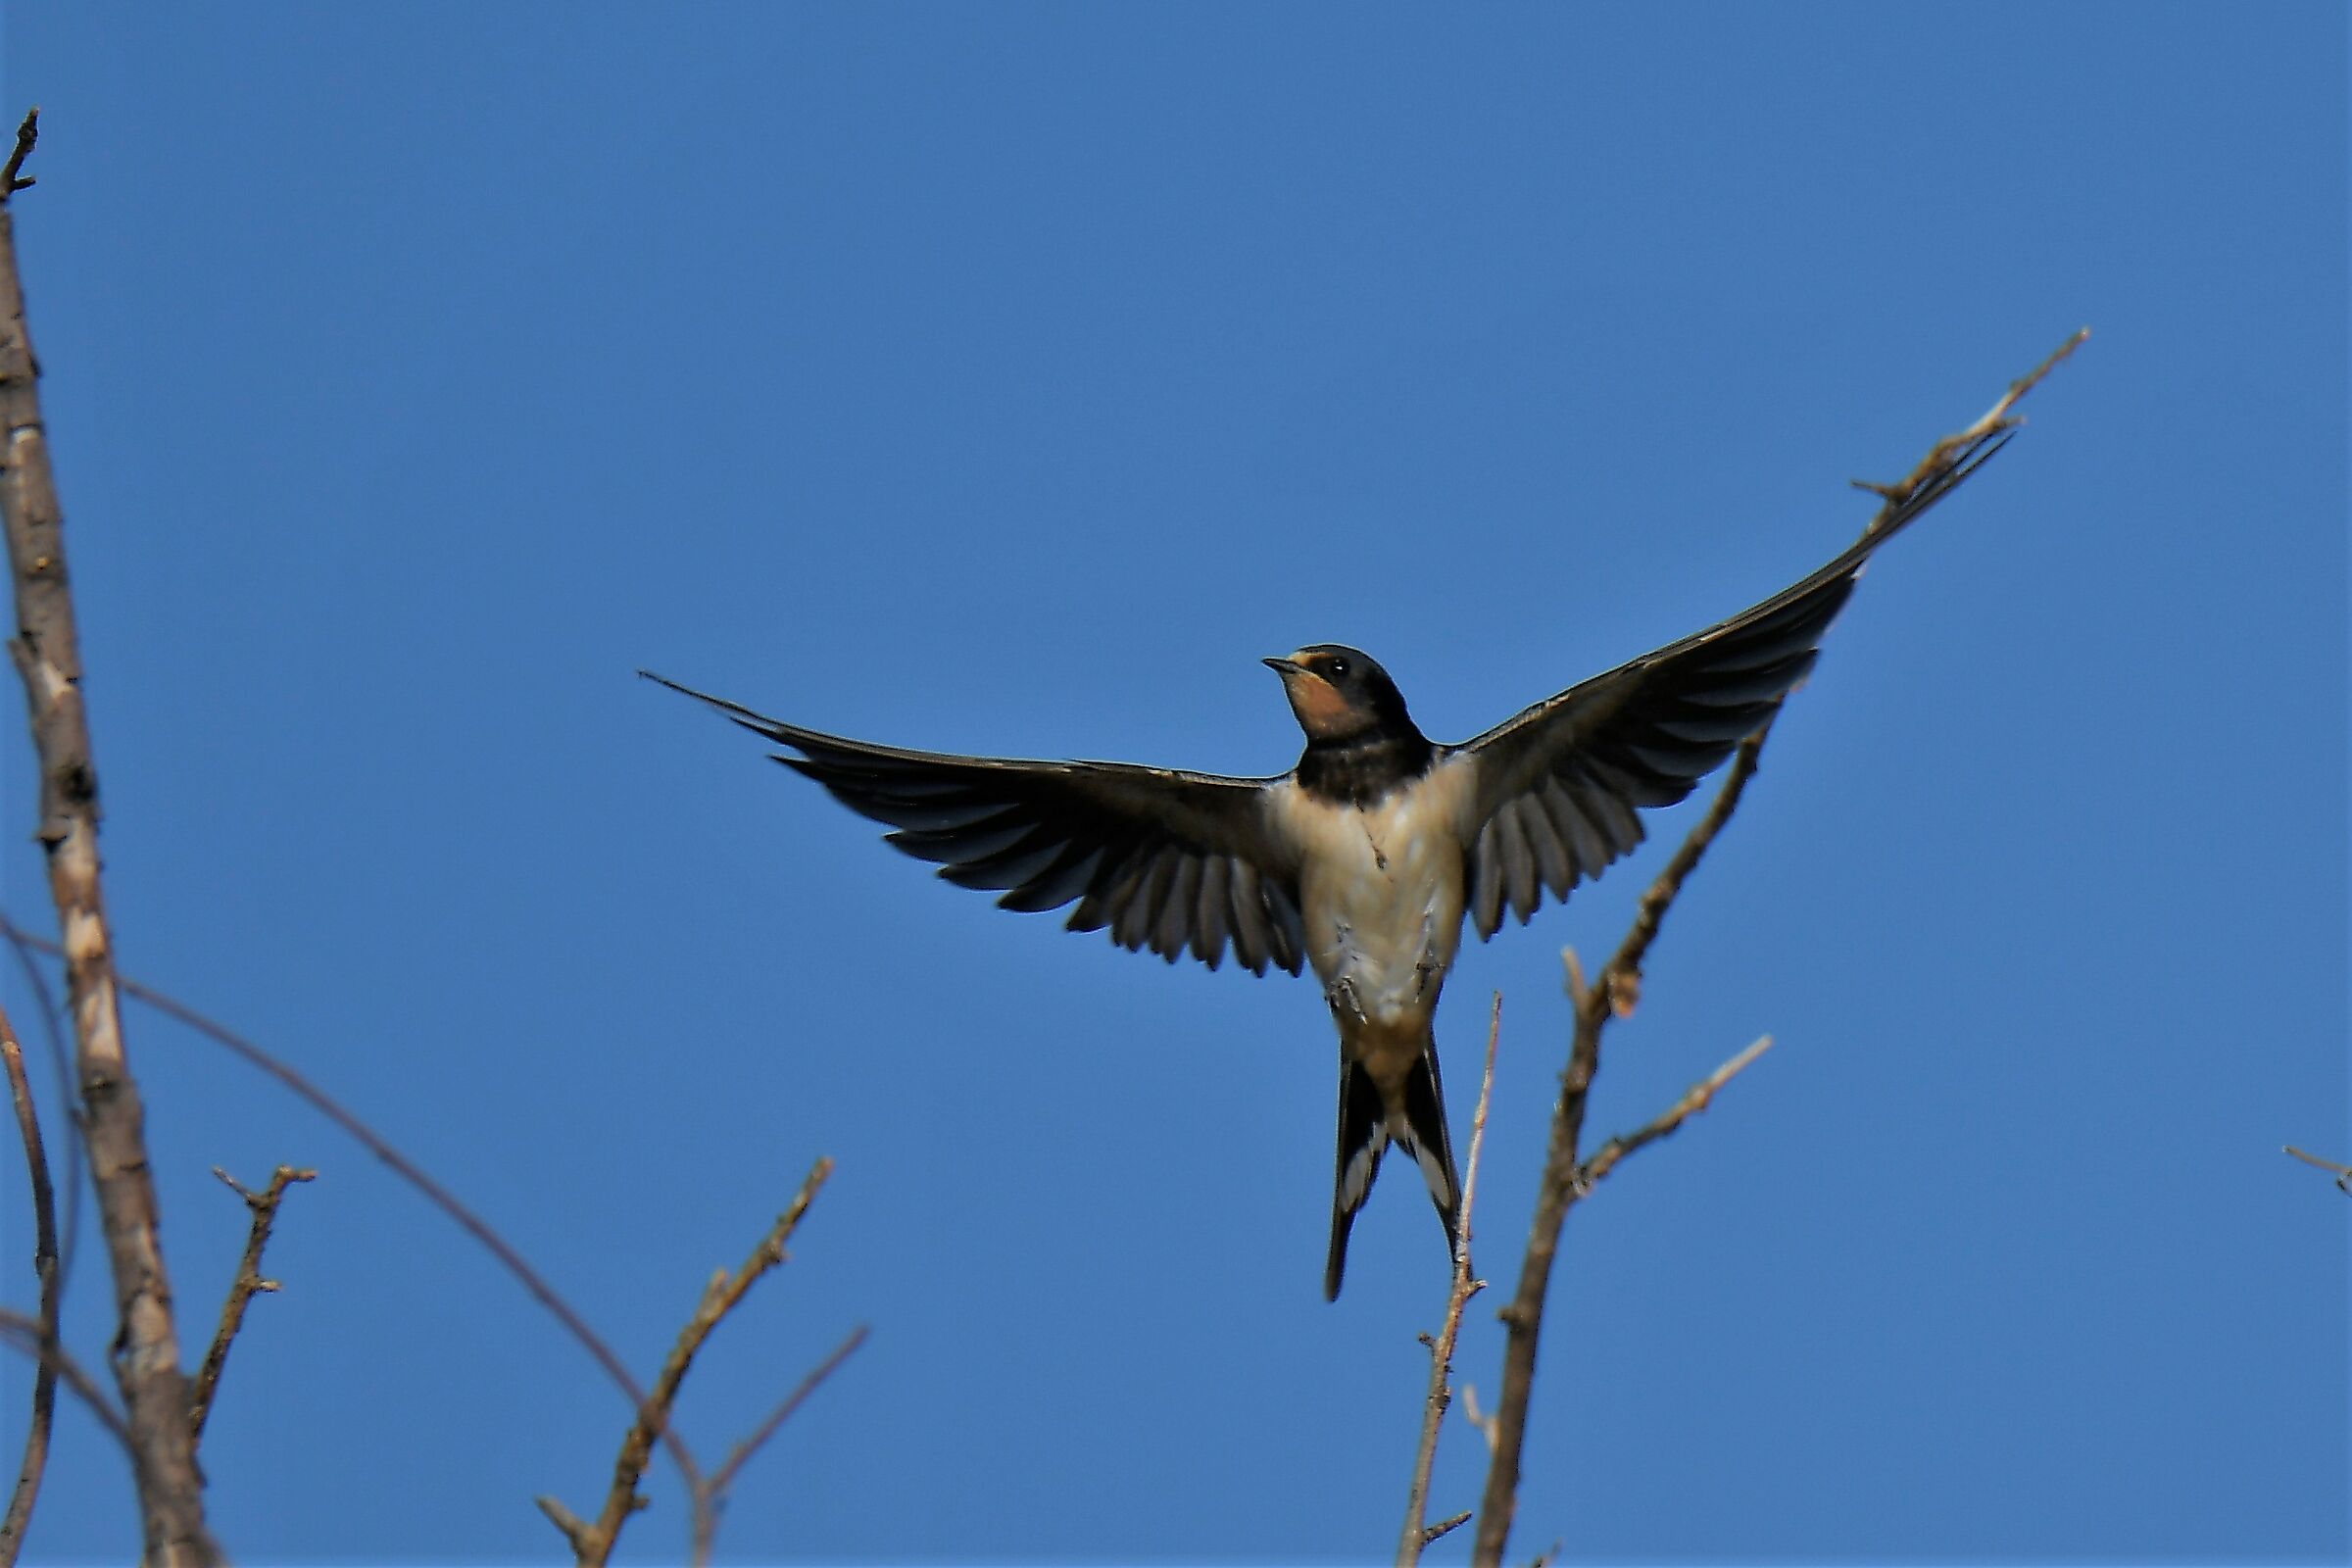 swallow flying on the fly...